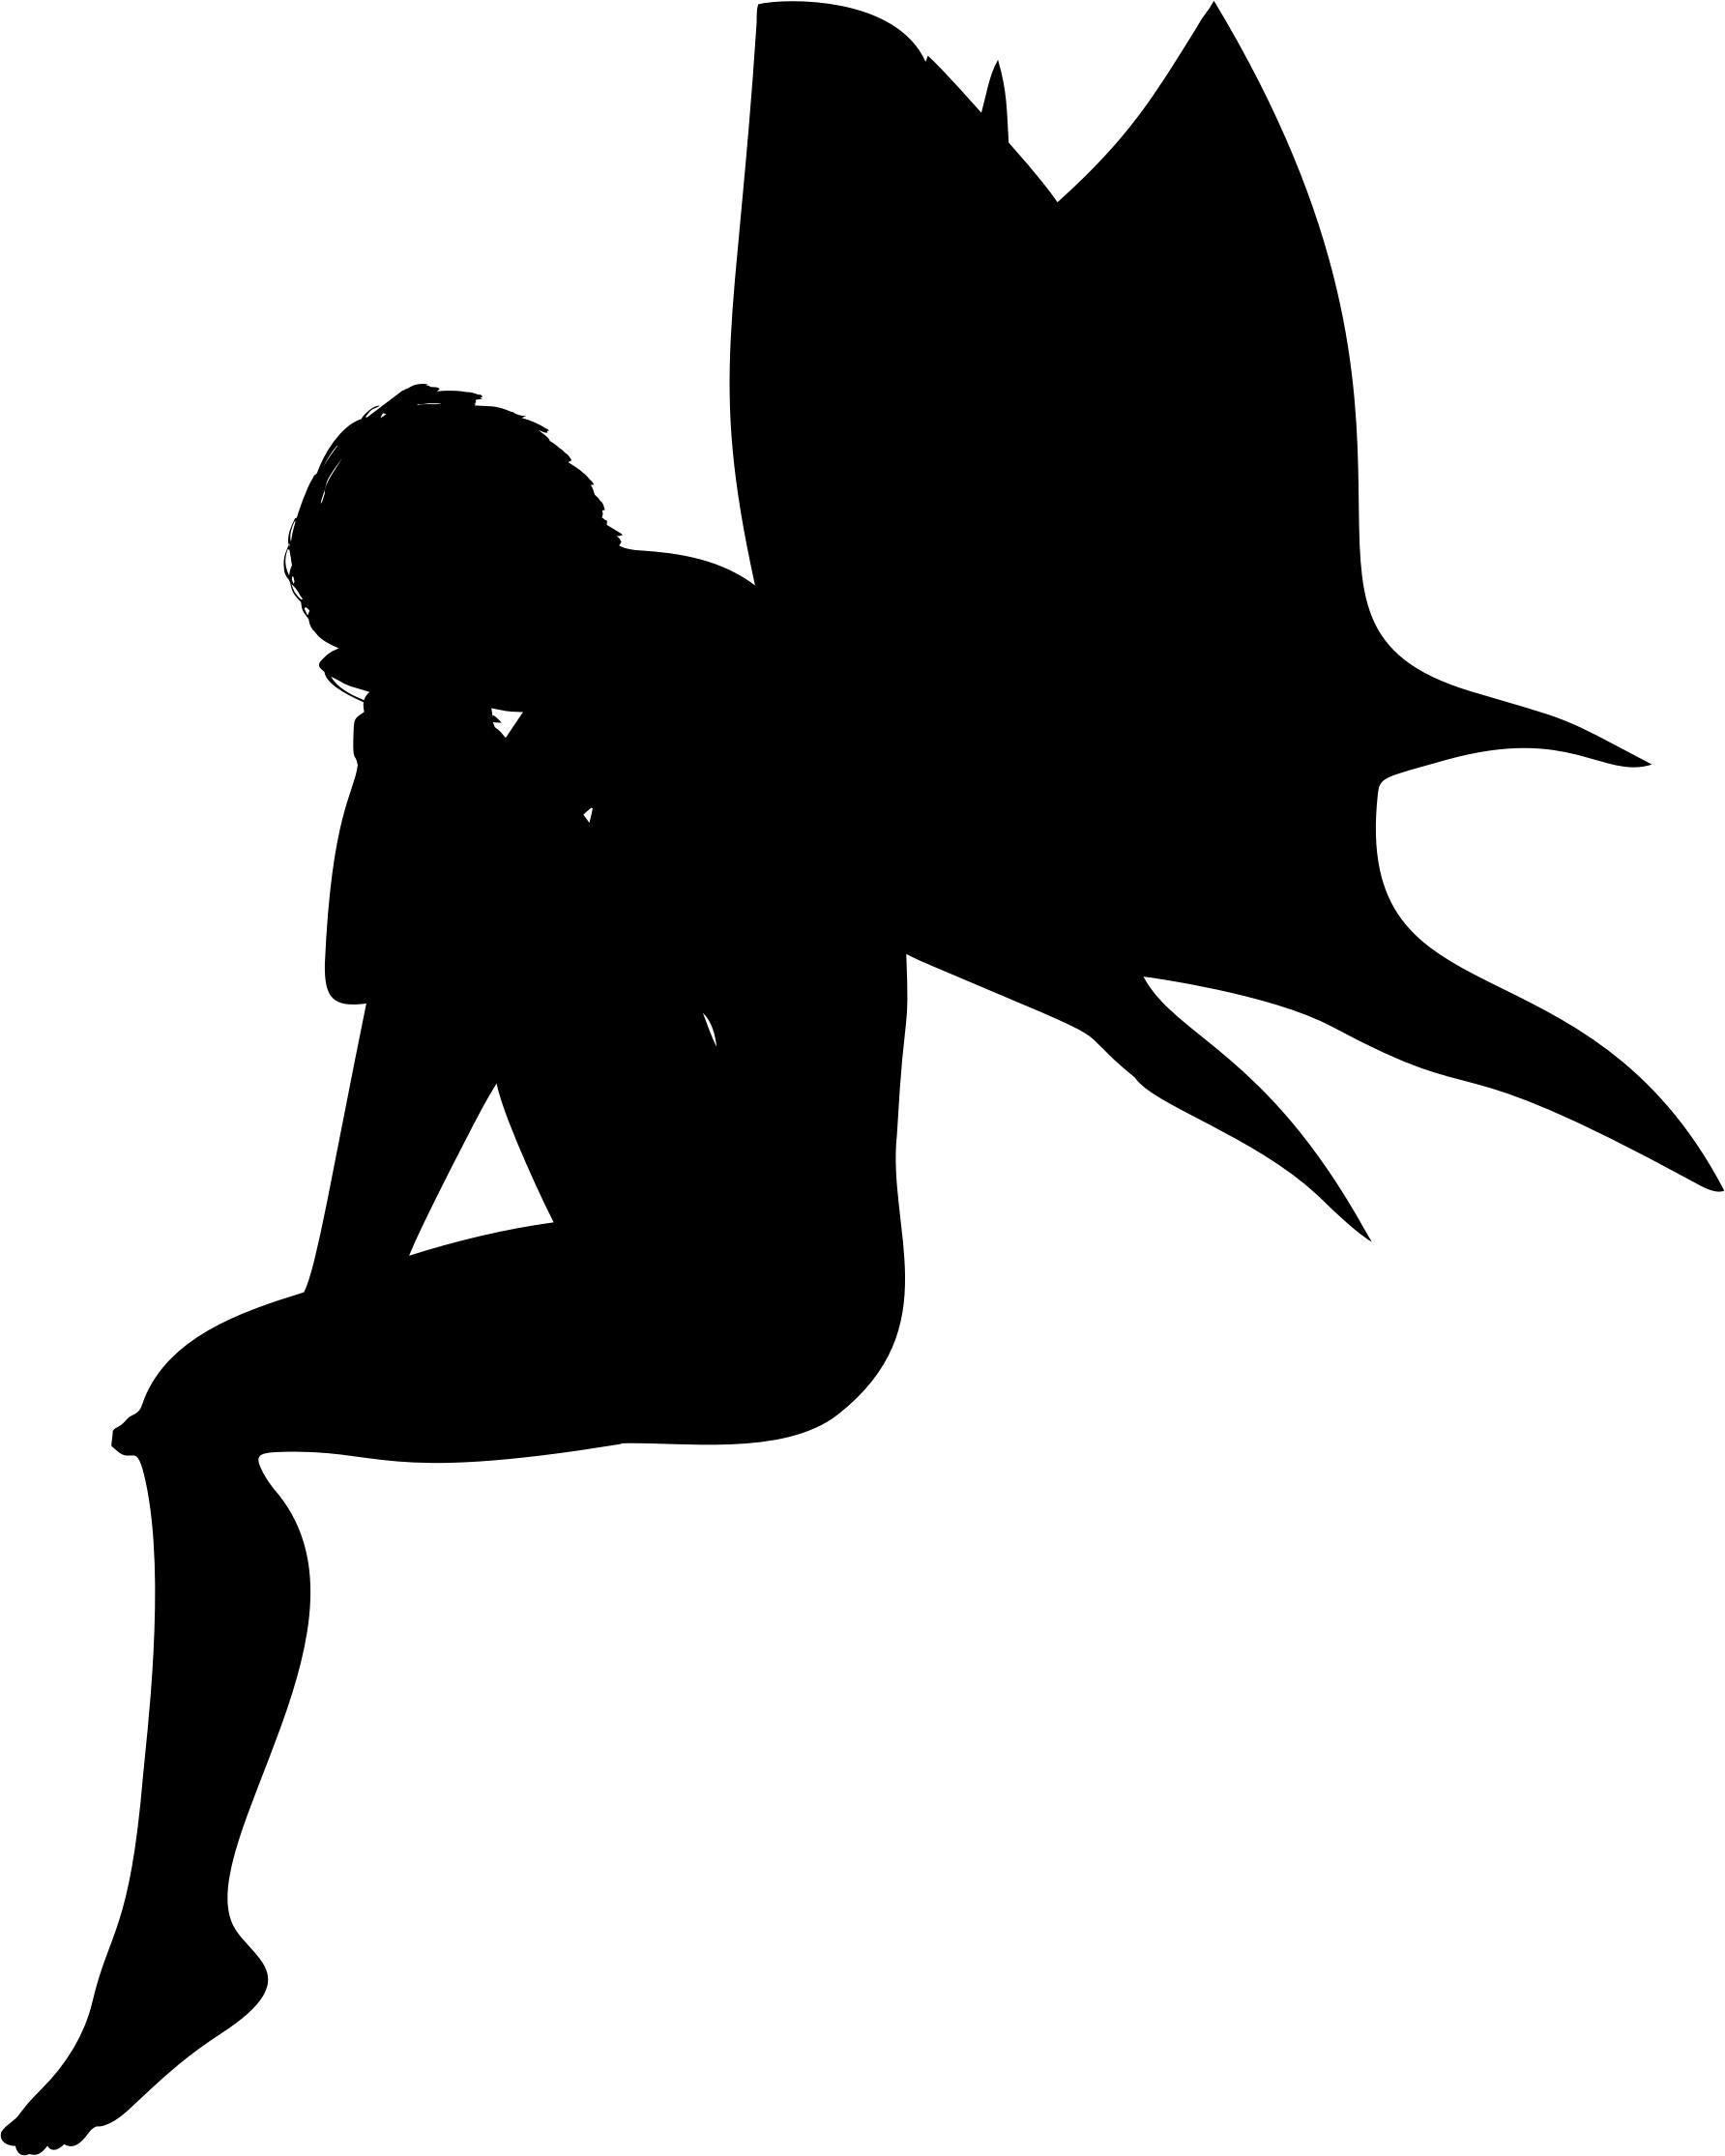 Depressed Fairy Silhouette png